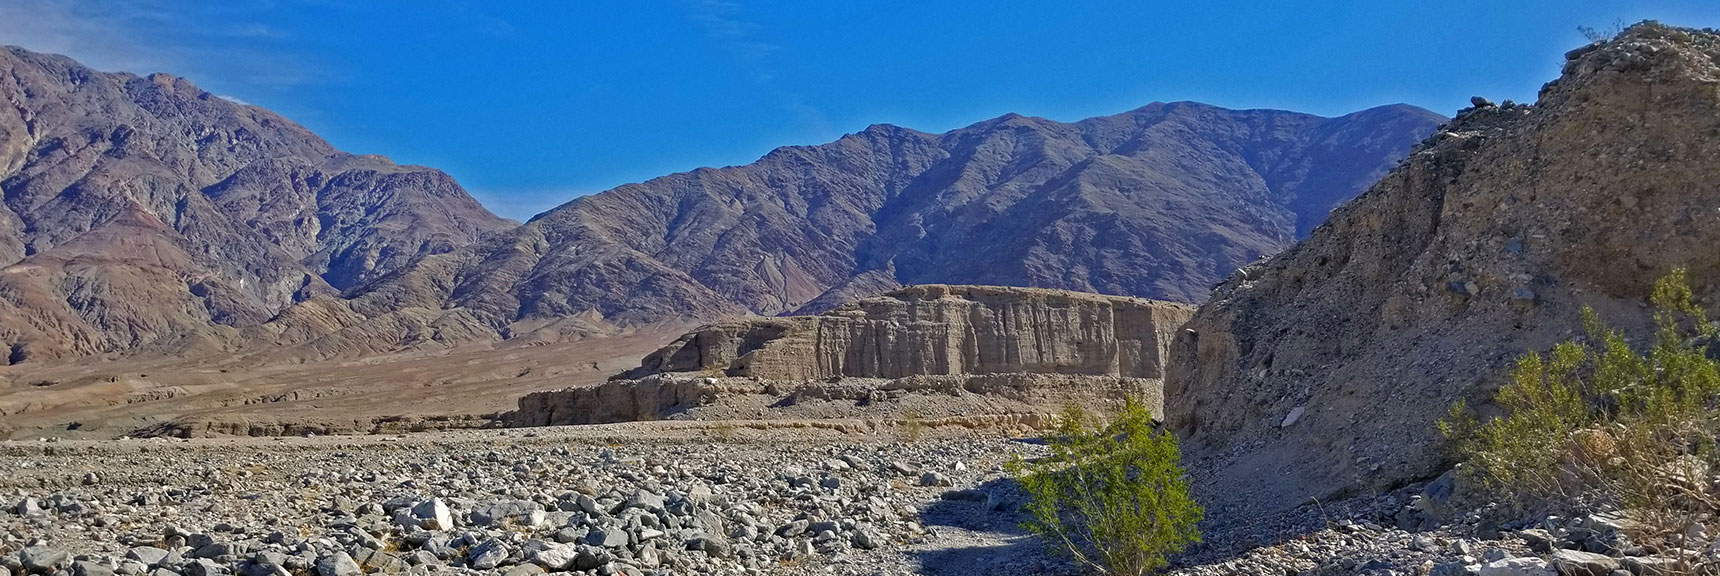 Turning the Corner into the Entrance of Willow Canyon | Willow Canyon | Death Valley National Park, California